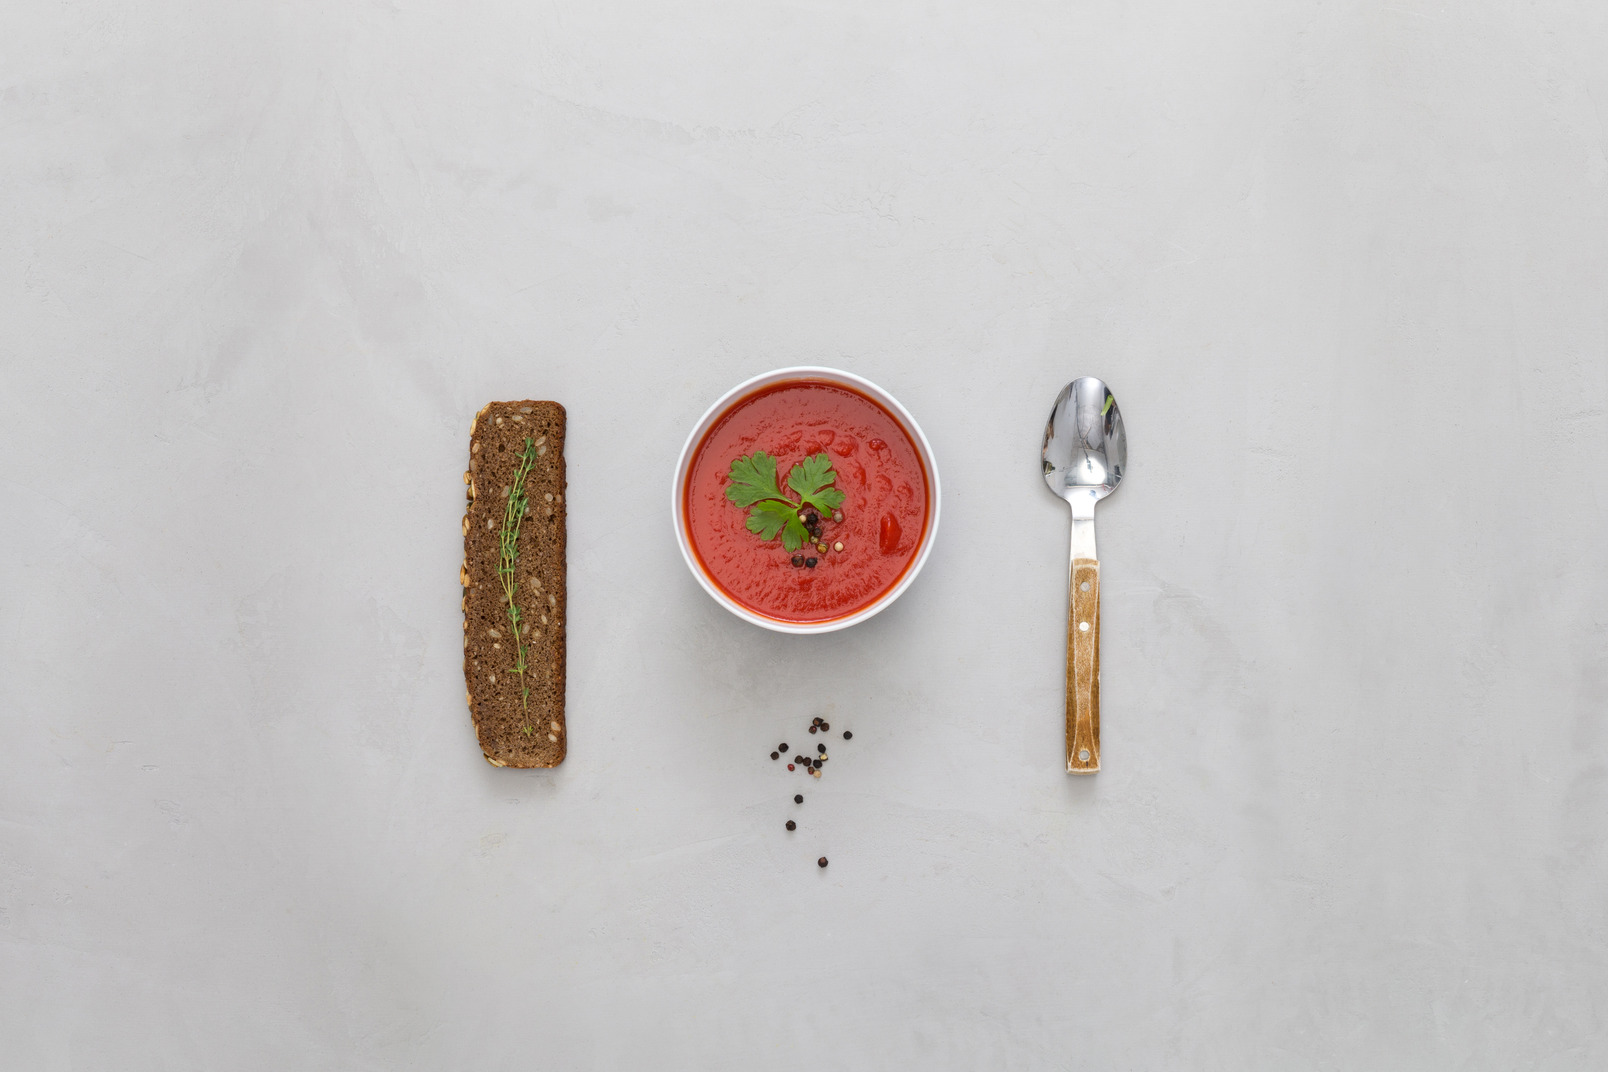 Bowl of tomato sauce, snack and spoon